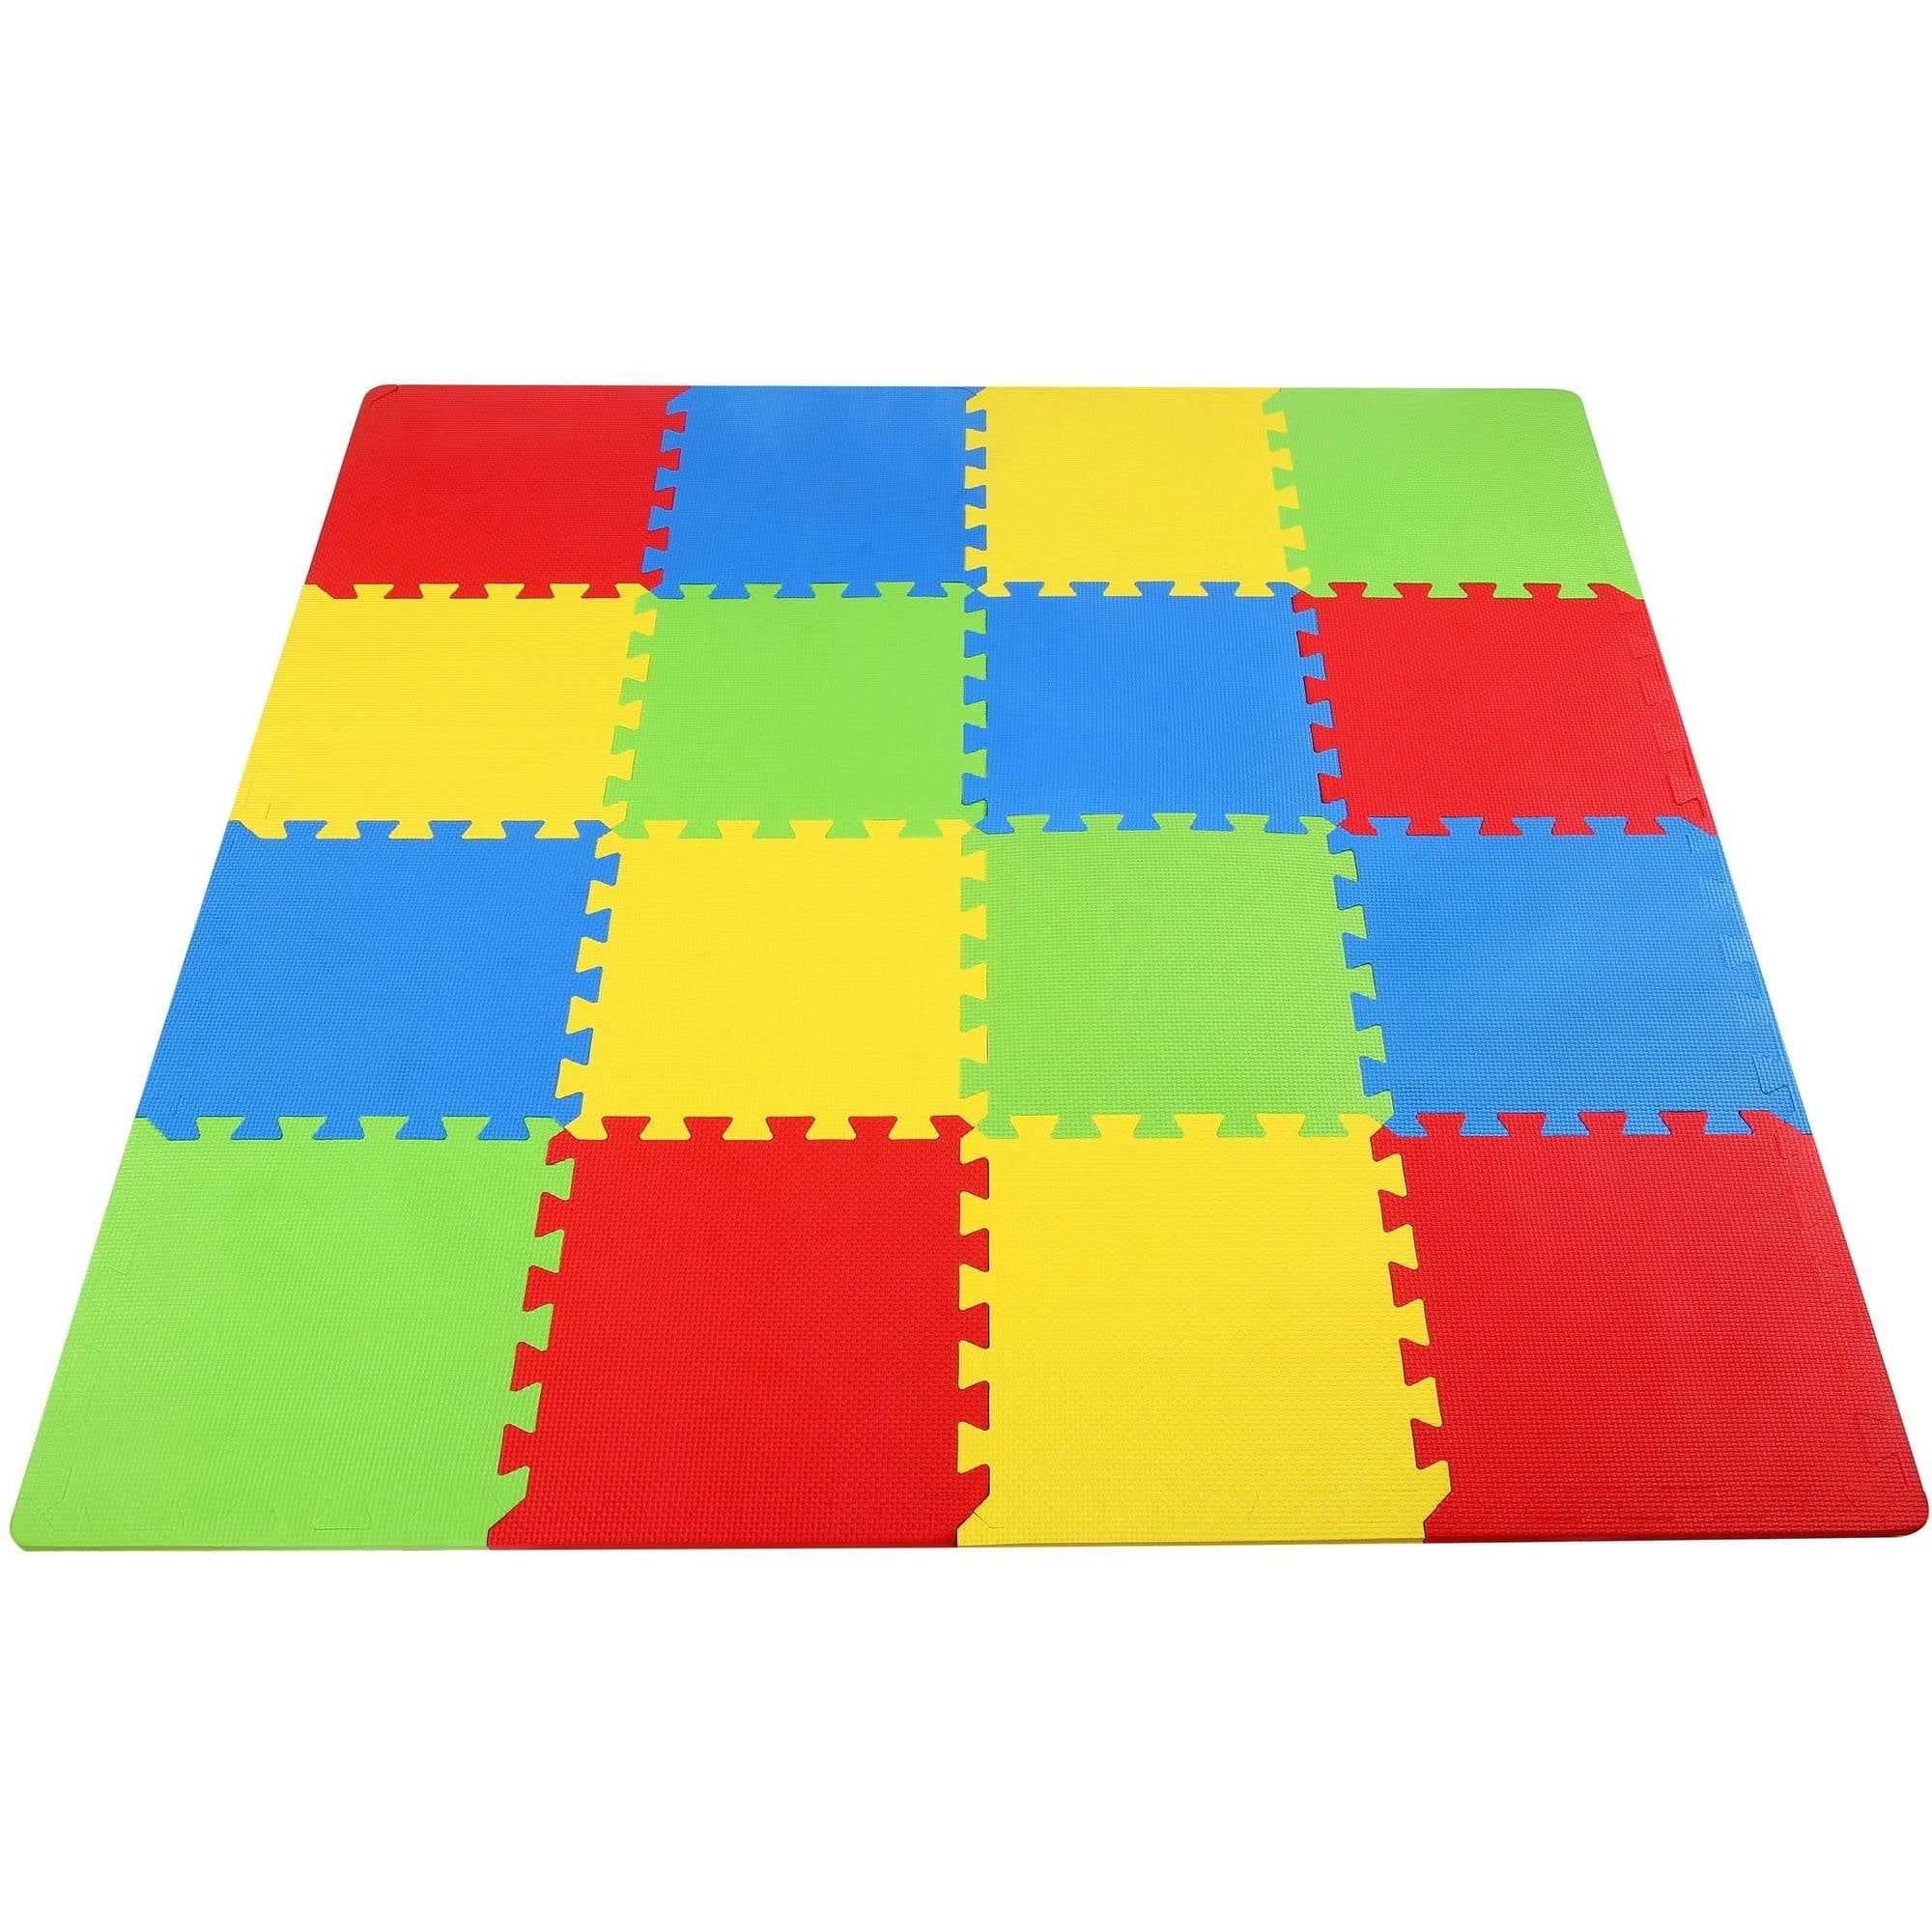 Infants Puzzle Crawling Mat for Playroom & Nursery 1: 2.4x2.4inch Toddlers & Kids Puzzle Exercise Play Mat with EVA Foam Interlocking Floor Tiles 